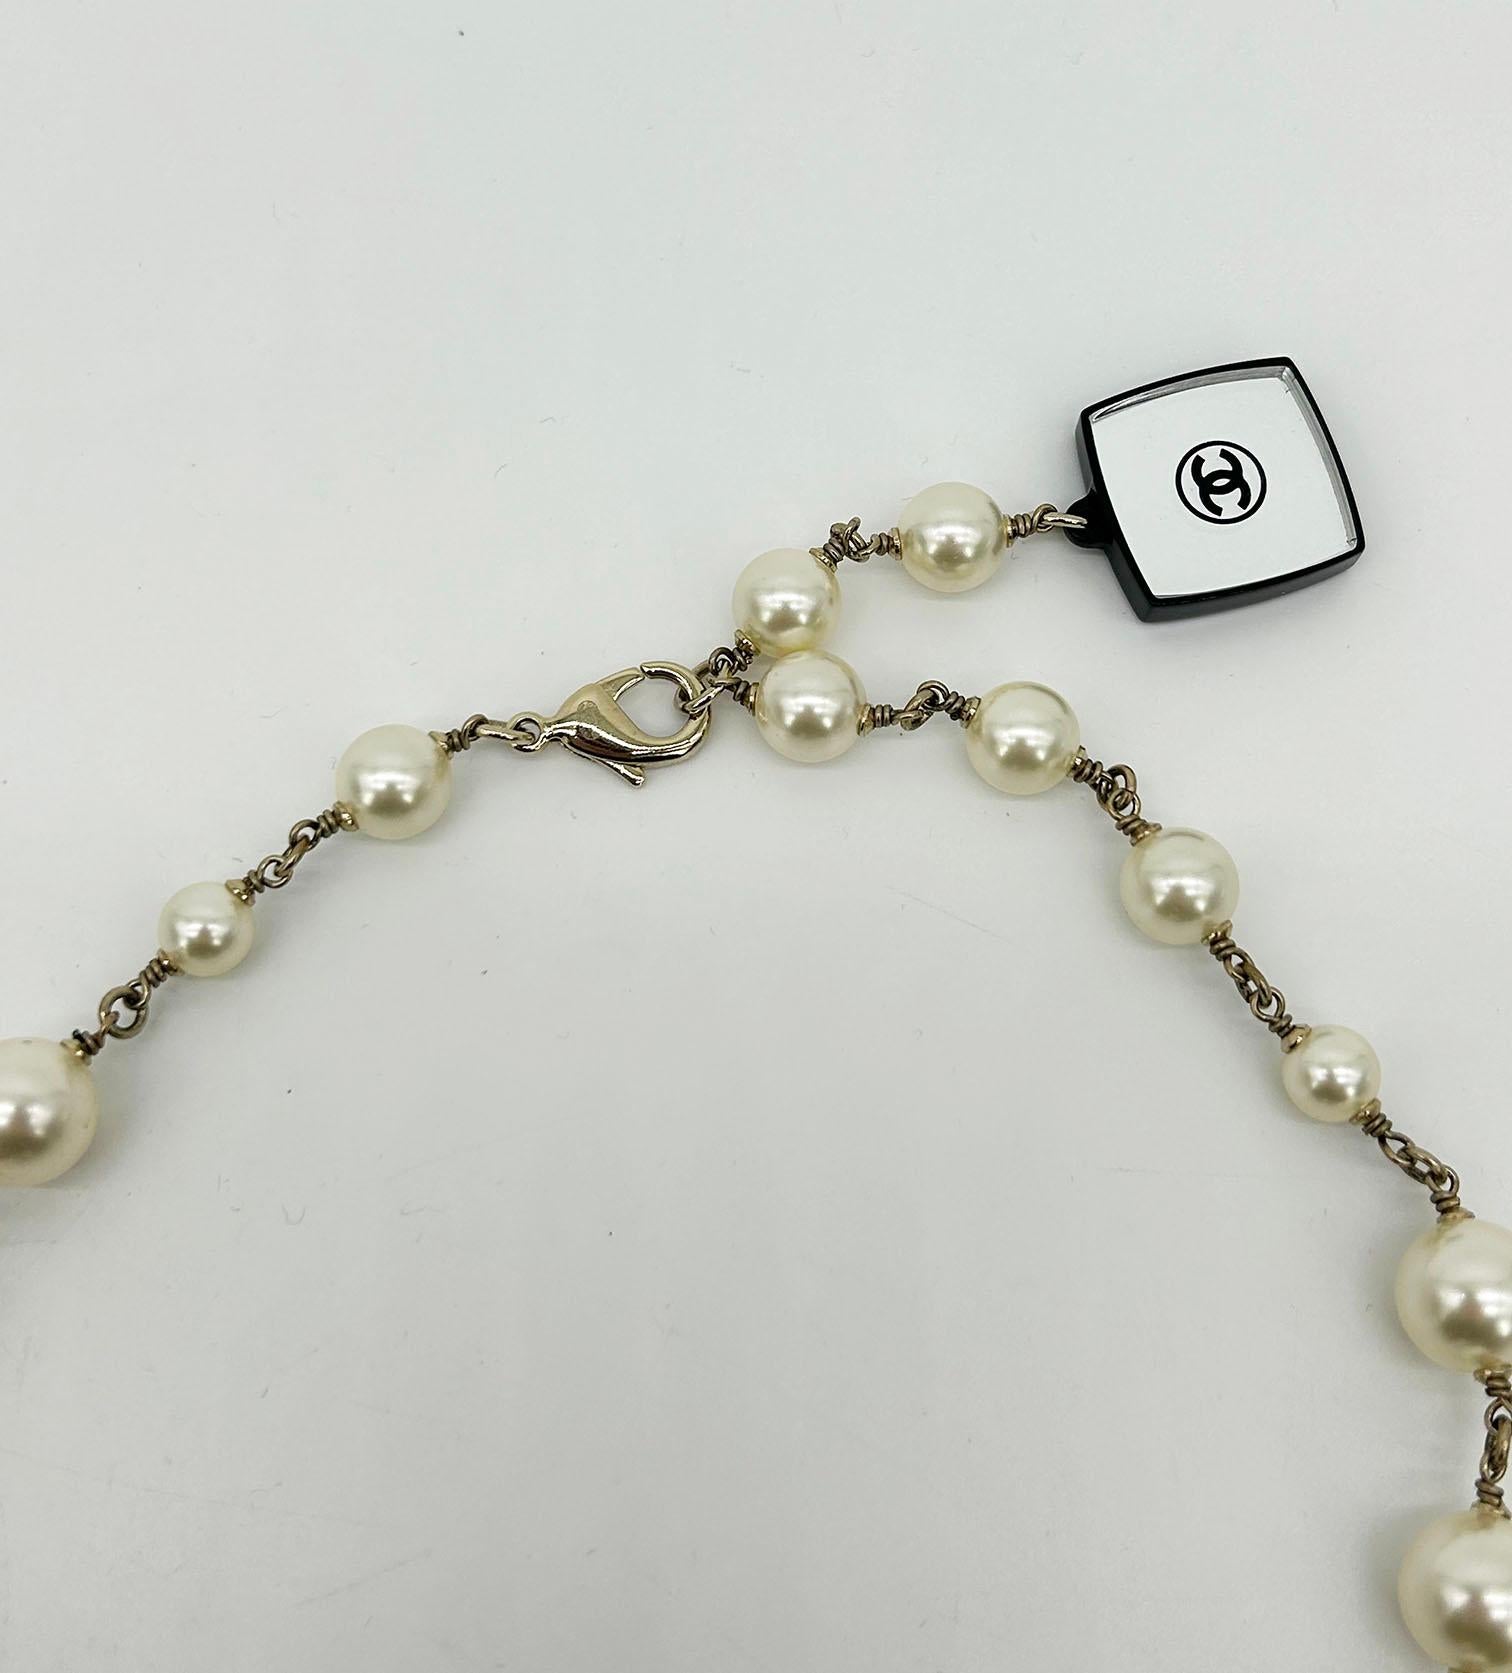 Chanel Vintage Make Up Charm Beaded Pearl Chain Necklace For Sale 3